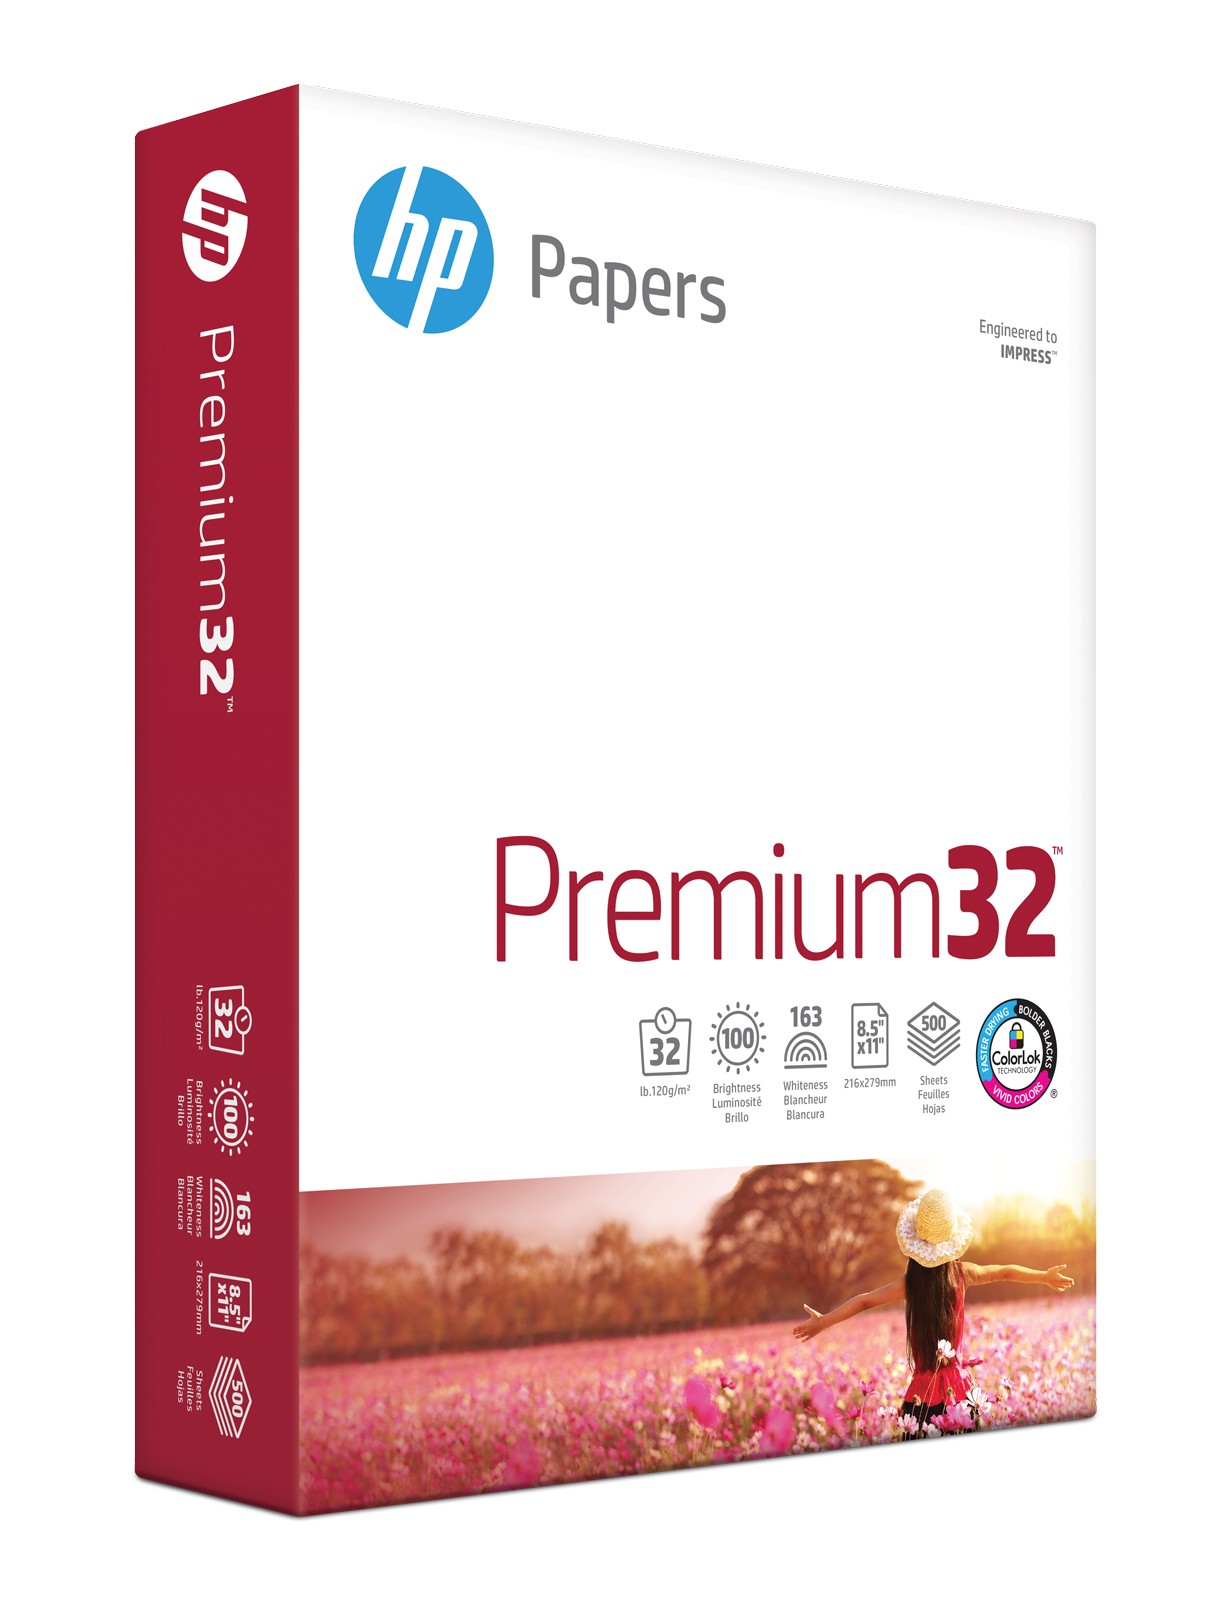 HP Papers Premium32 Laser Paper - White - 100 Brightness - Letter - 8 1/2  x 11 - 32 lb Basis Weight - 500 / Ream - Acid-free, Heavyweight - Laser  Paper, International Paper Company